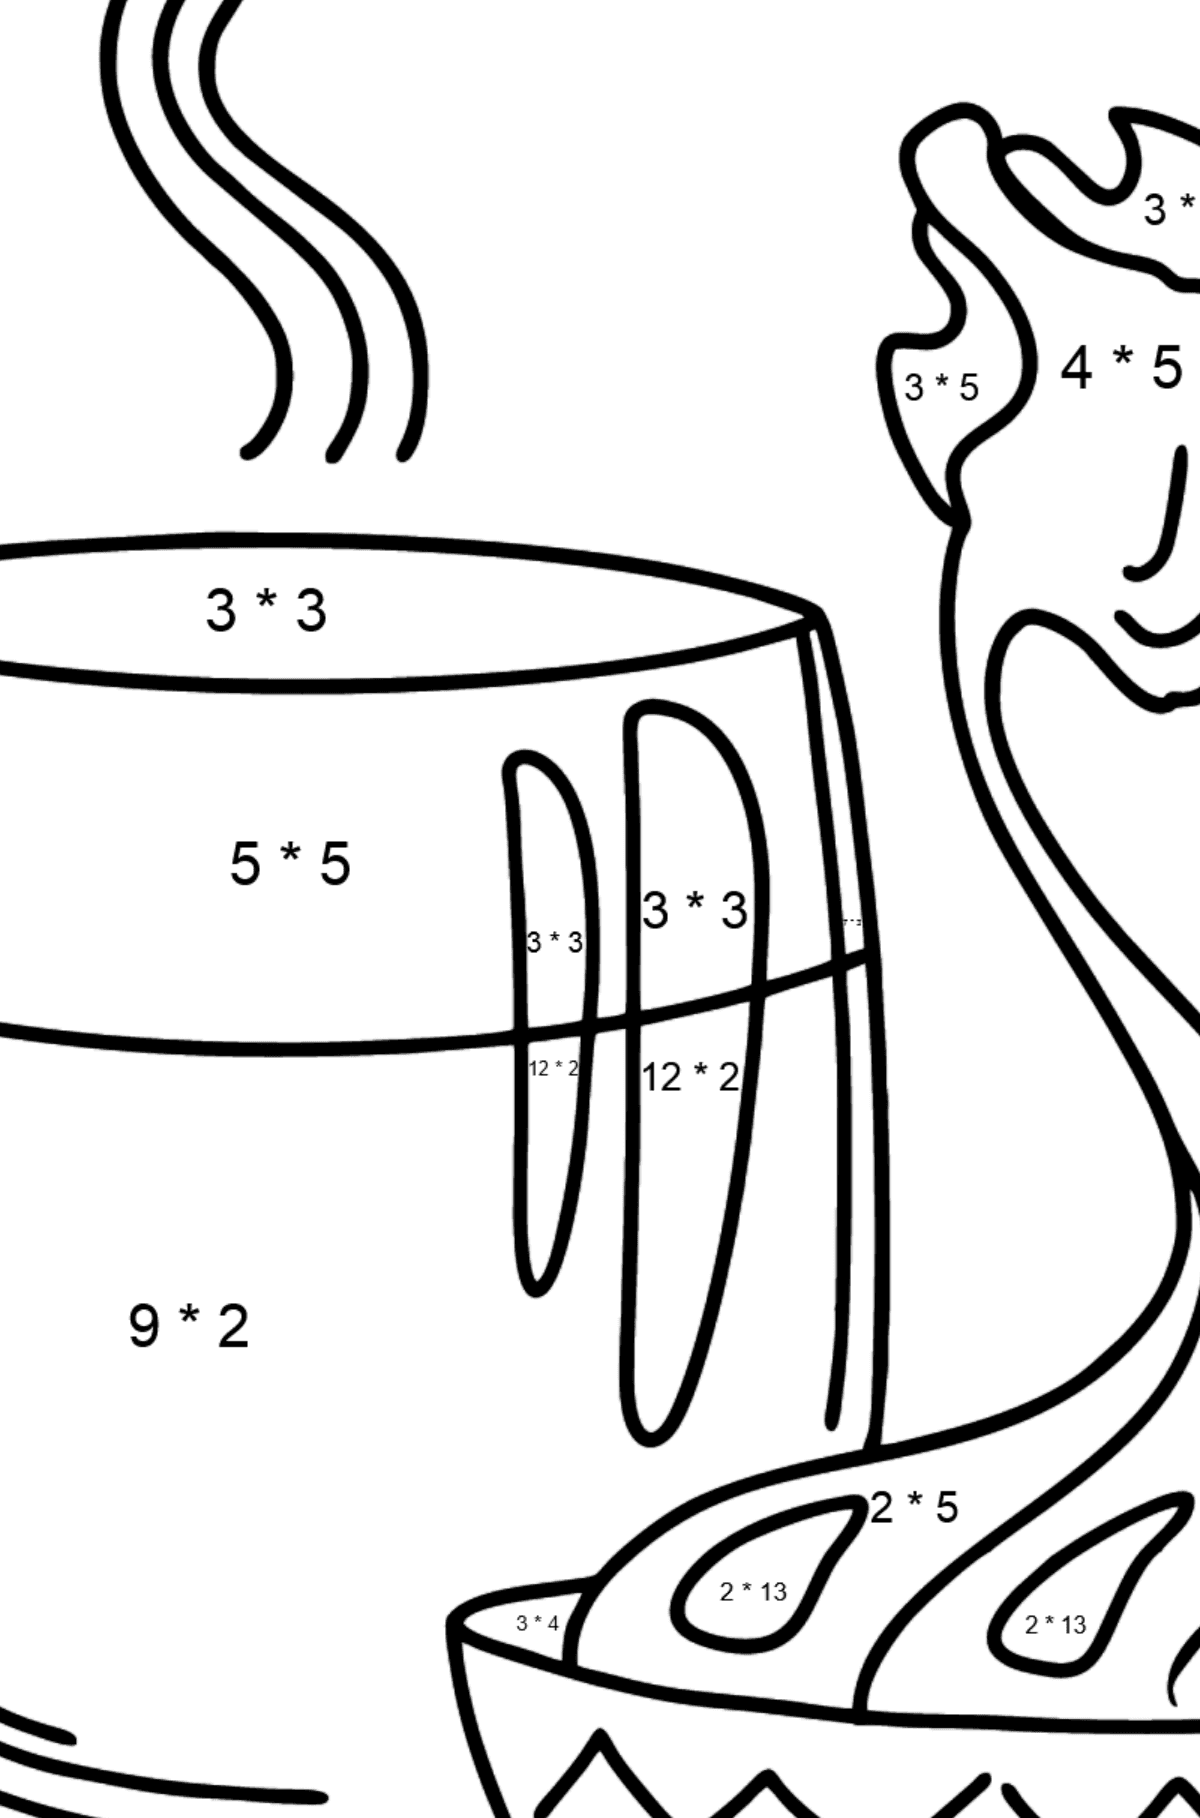 Milk with Honey coloring page - Math Coloring - Multiplication for Kids